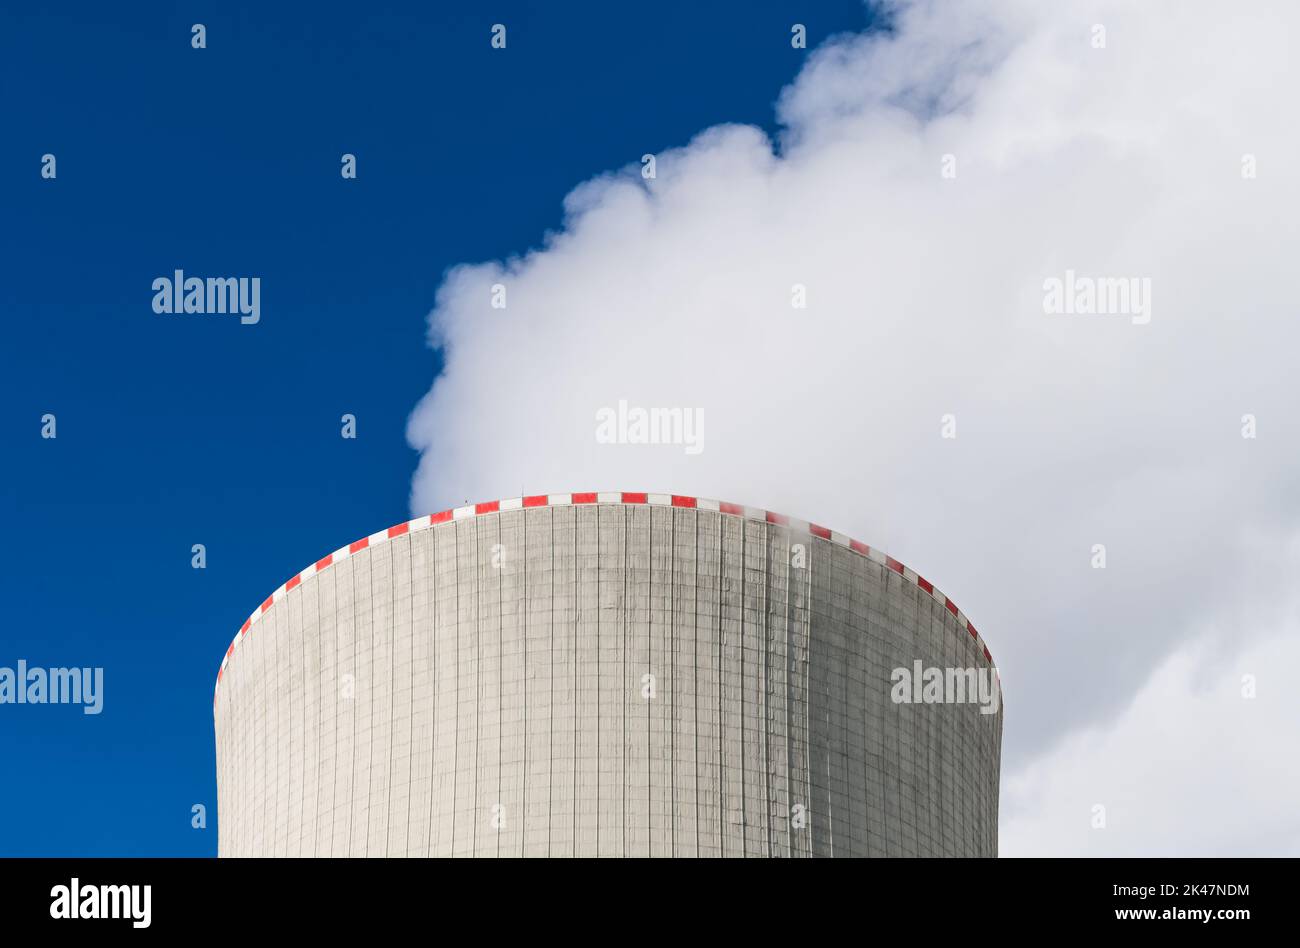 Top of cooling tower with warning red broken line and white steam plume on blue sky background. Waste heat rejection from nuclear power plant to air. Stock Photo